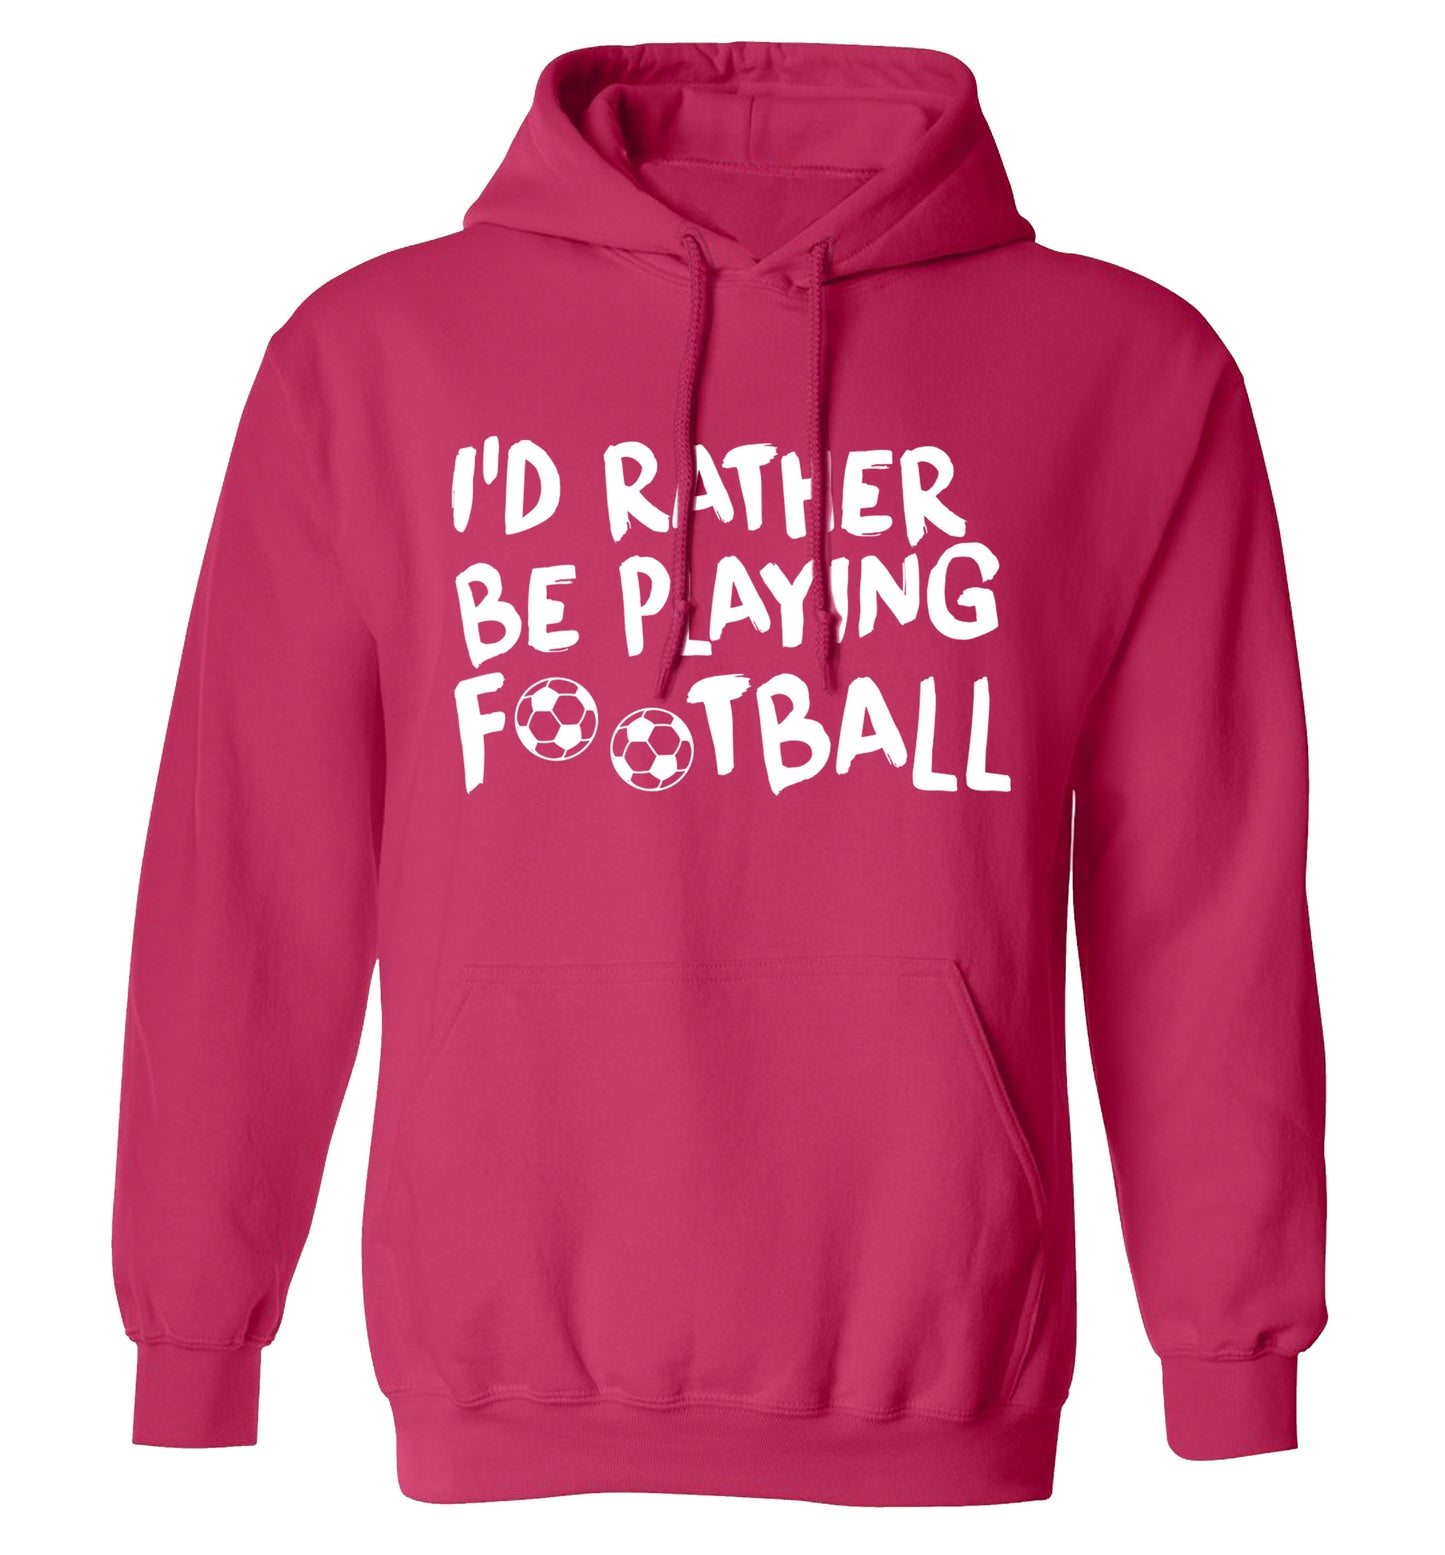 I'd rather be playing football adults unisexpink hoodie 2XL